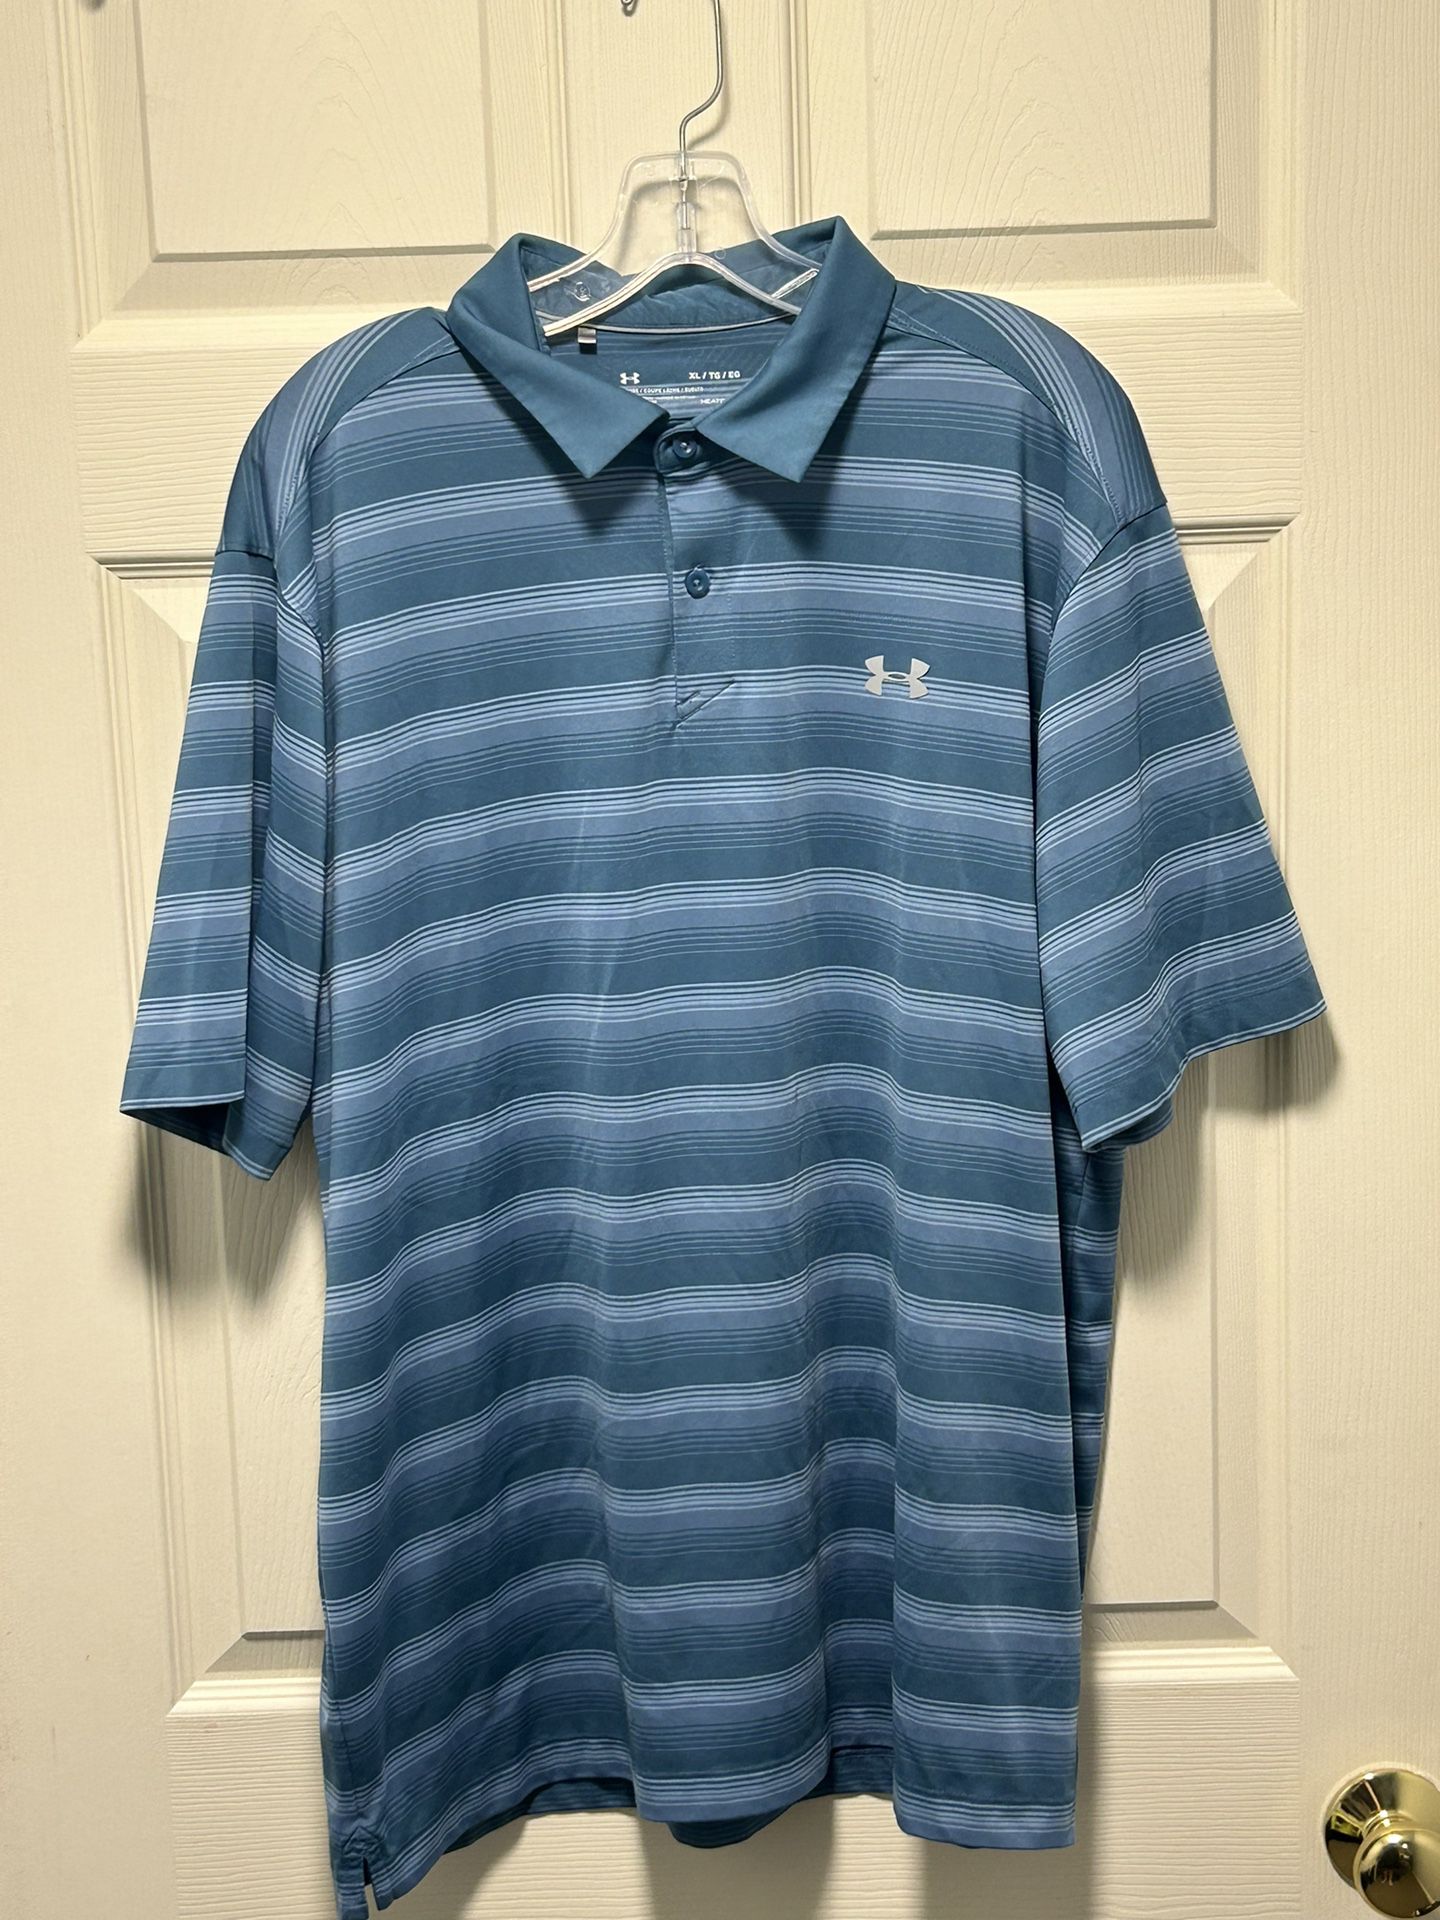 Mens Under Armour Heatgear Loose Fit Blue Stripe Polo Shirt Size XL Short  Sleeve for Sale in Abington, MA - OfferUp